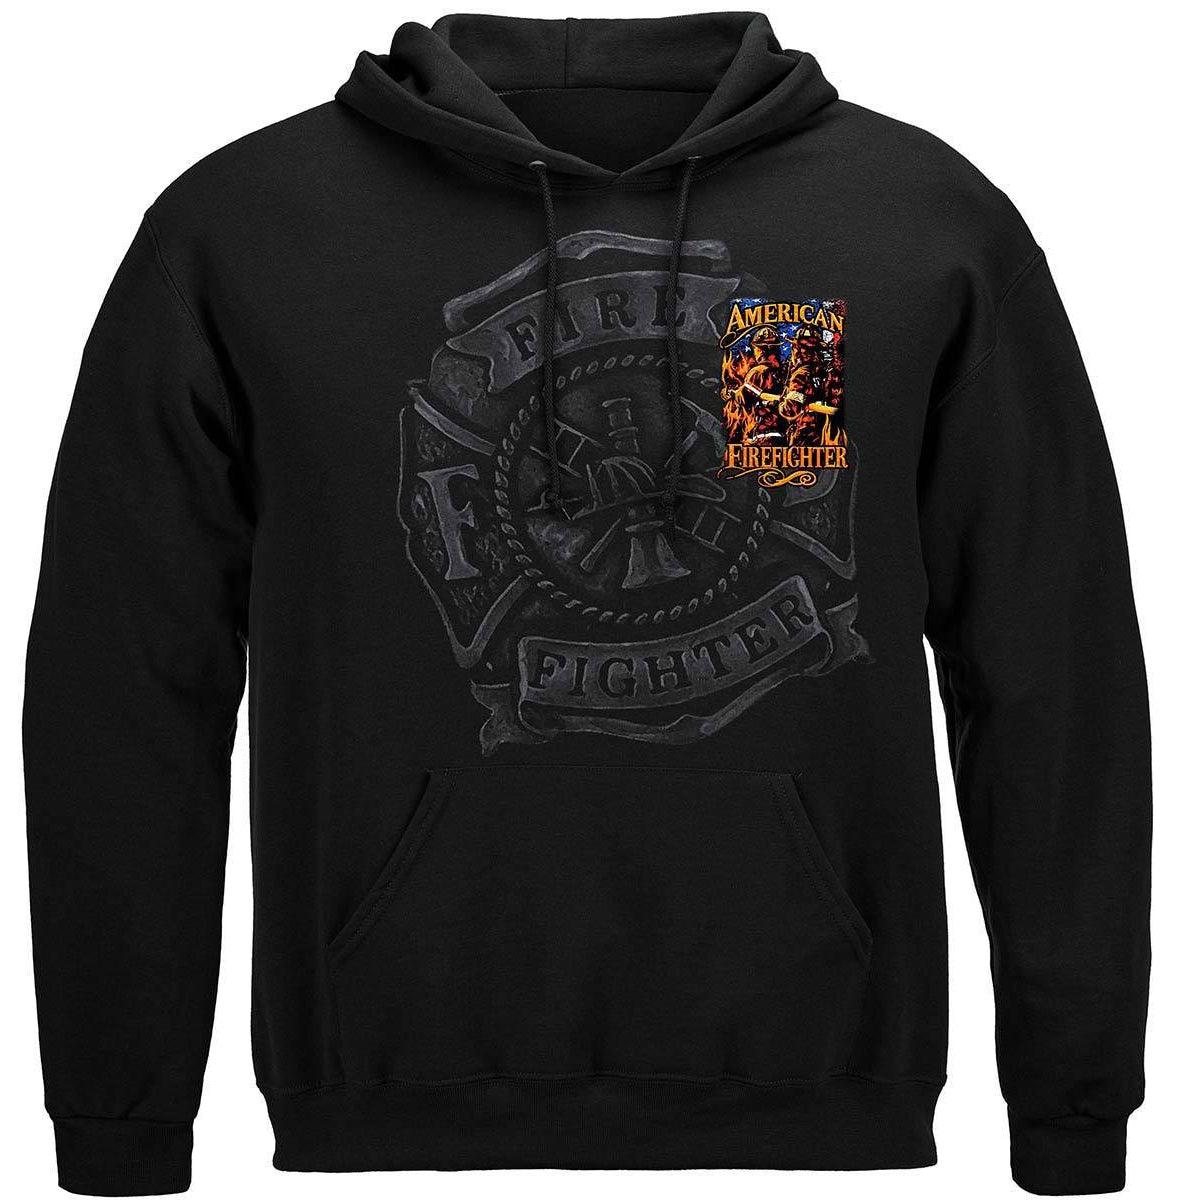 American Firefighter Long Sleeve - Military Republic